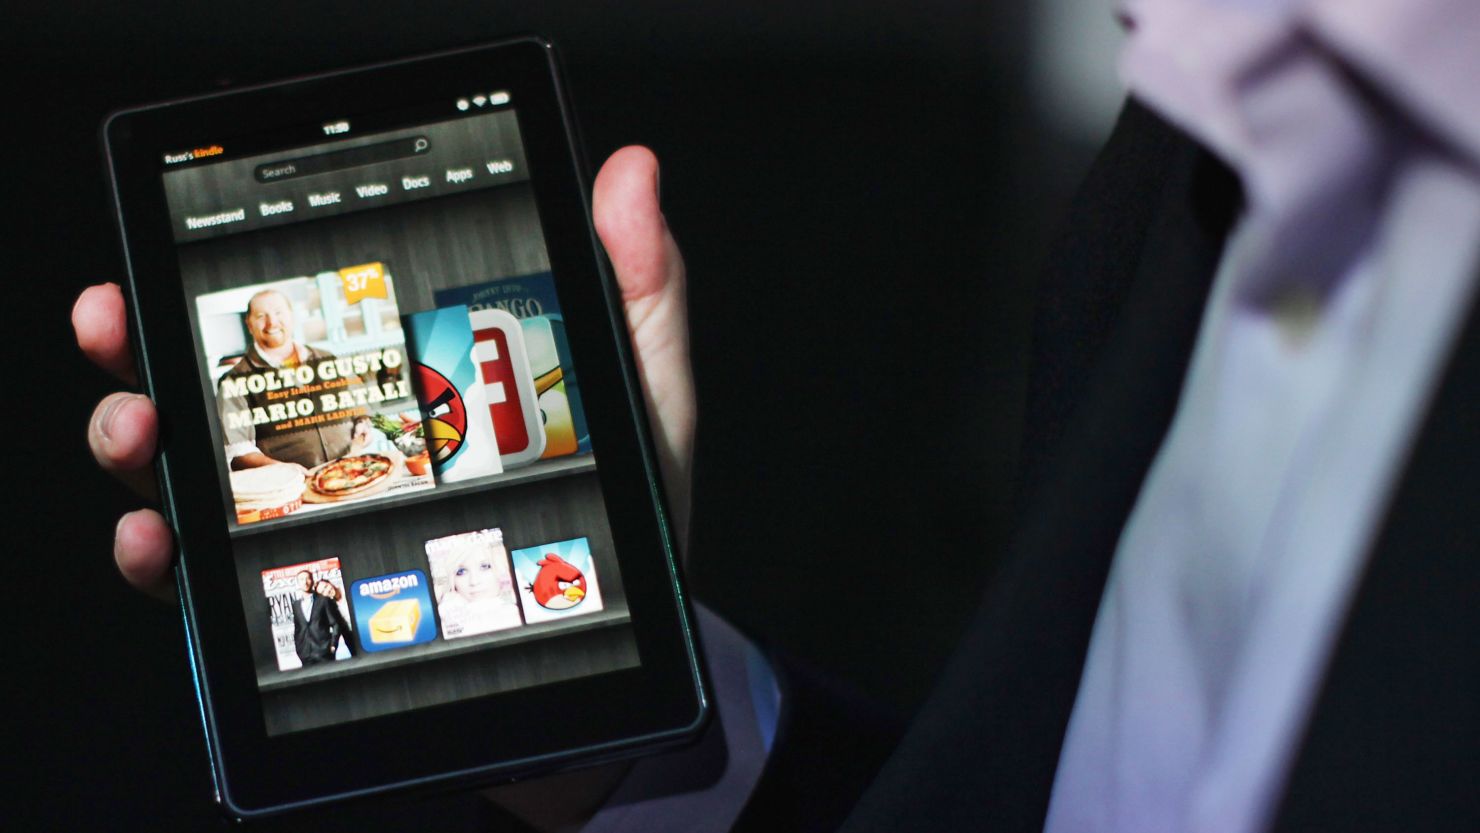 Amazon's Kindle Fire Android tablet, which will be a year old in November, will receive a successor shortly.